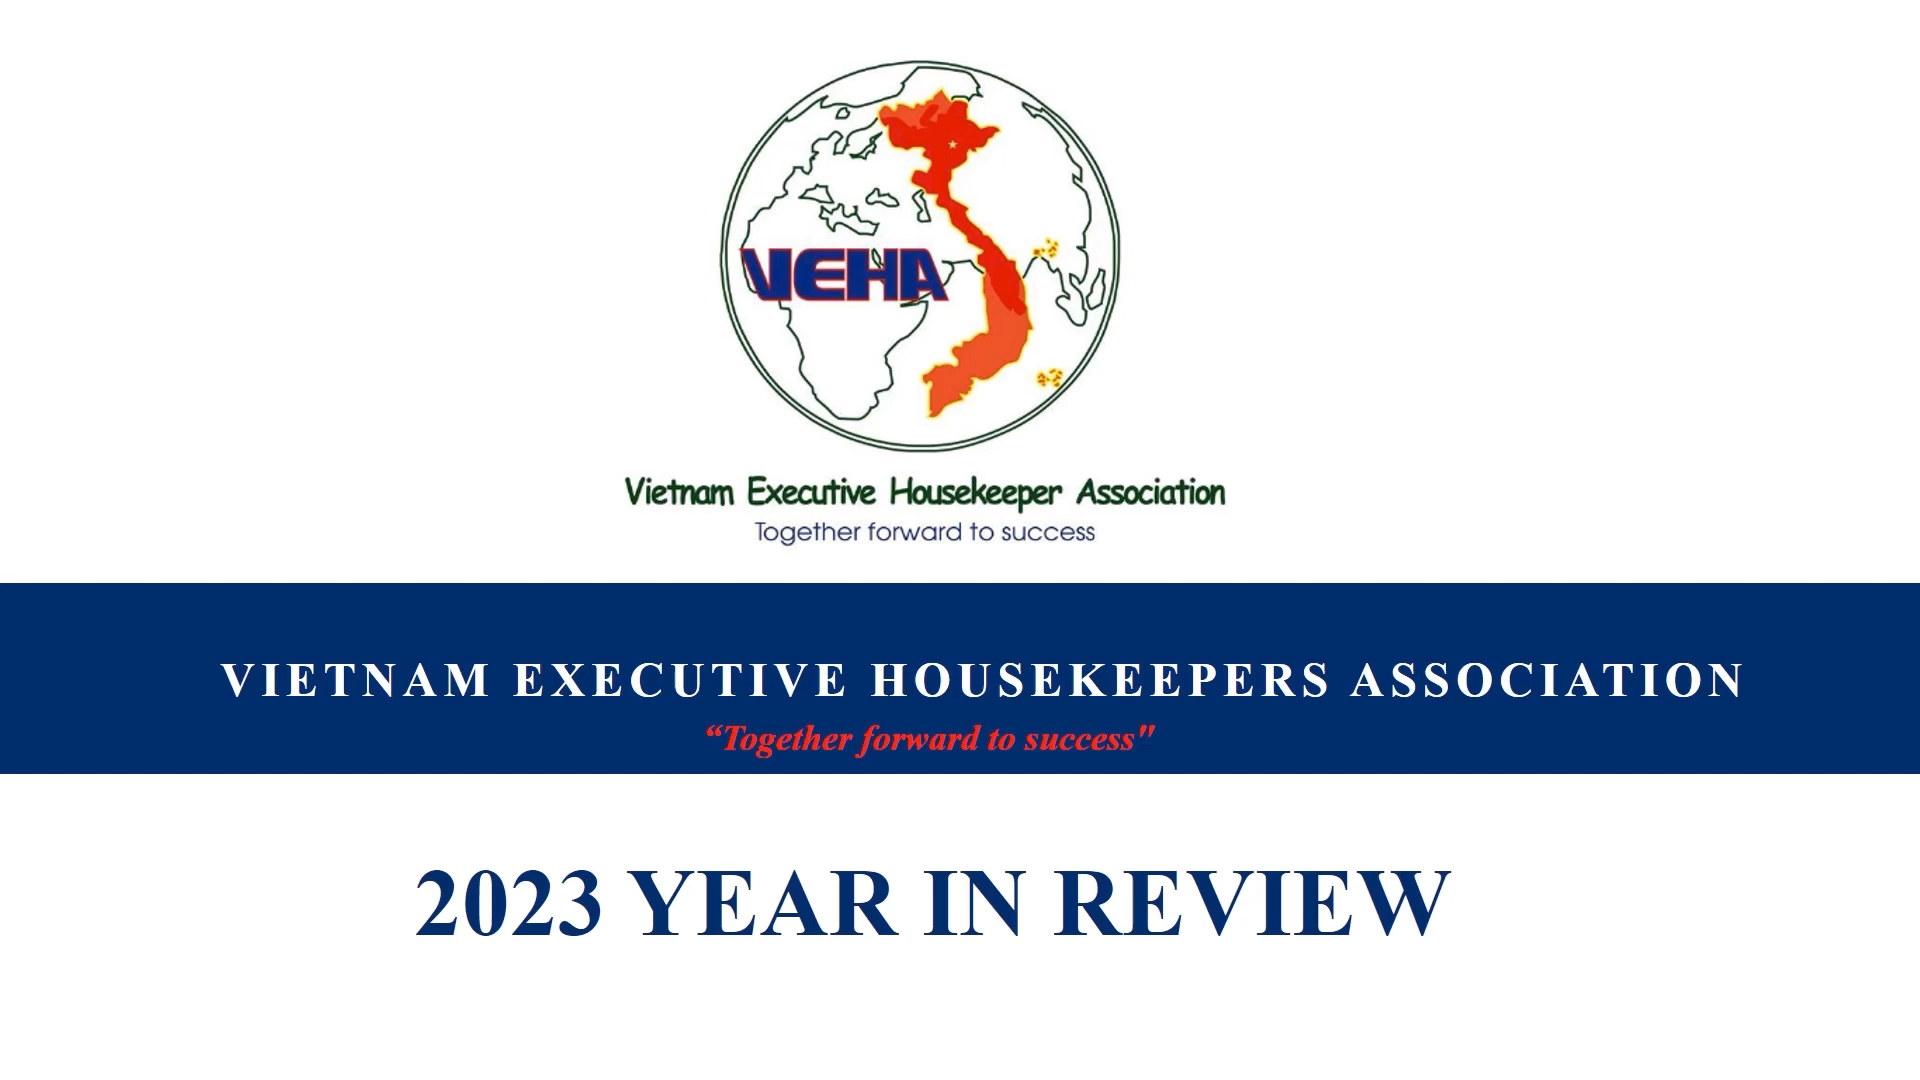 VEHA 2023 Year in Review - It has been a Great Year with our amazing achievements and Exciting Plan 2024 Ahead